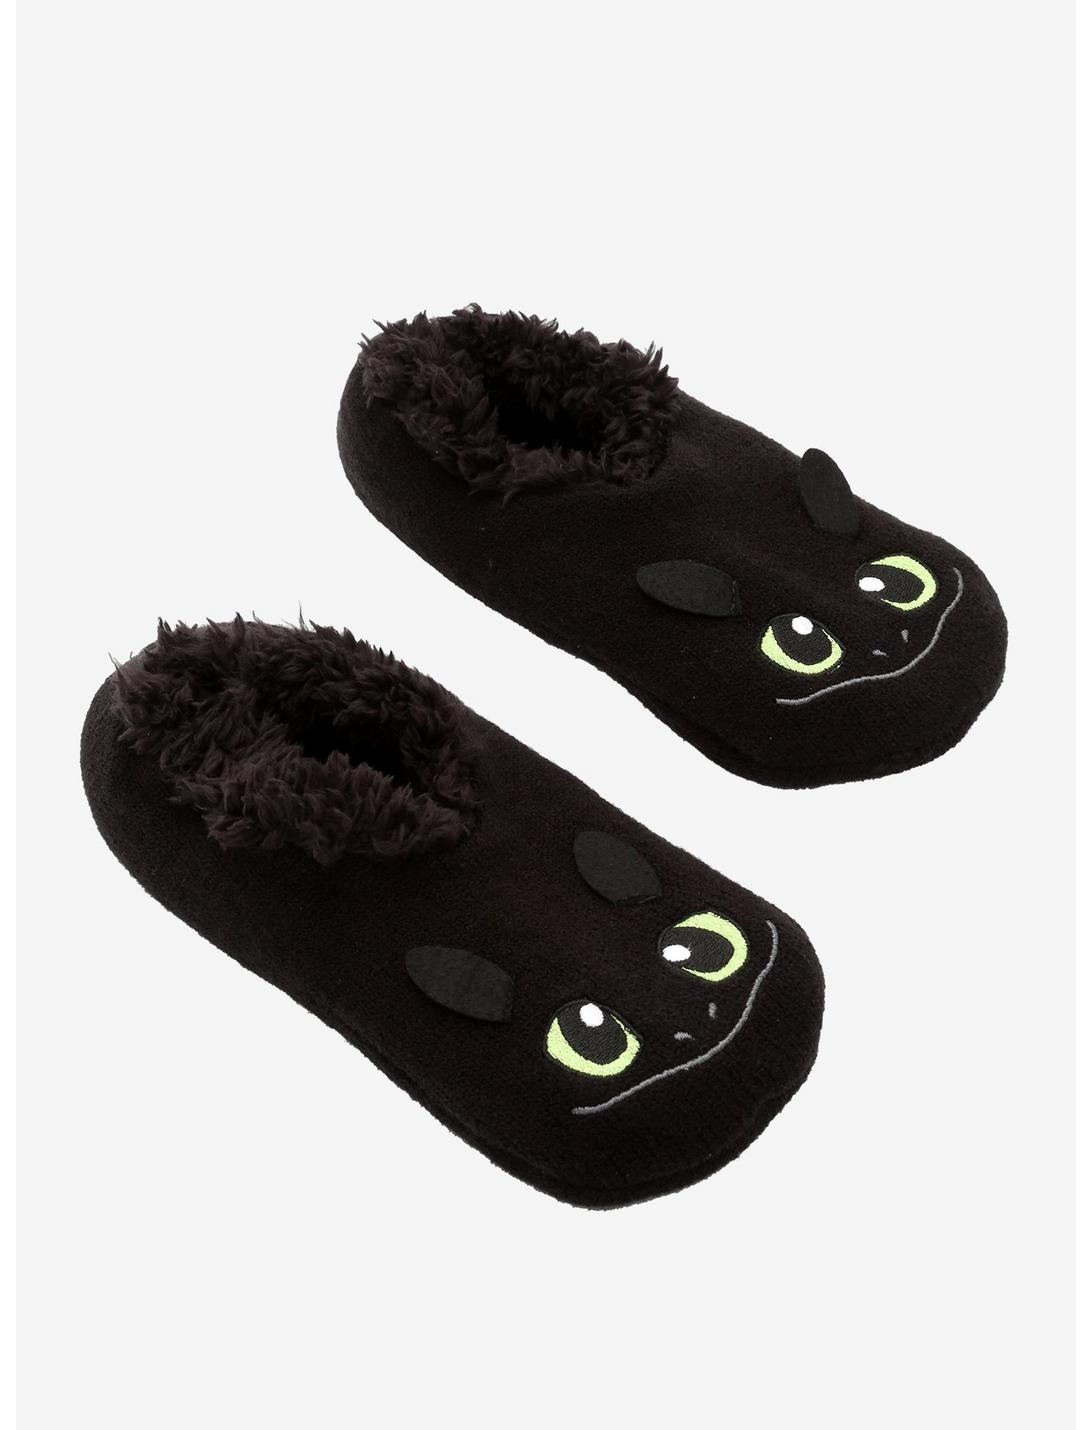 How To Train Your Dragon Toothless Cozy Slippers, , hi-res